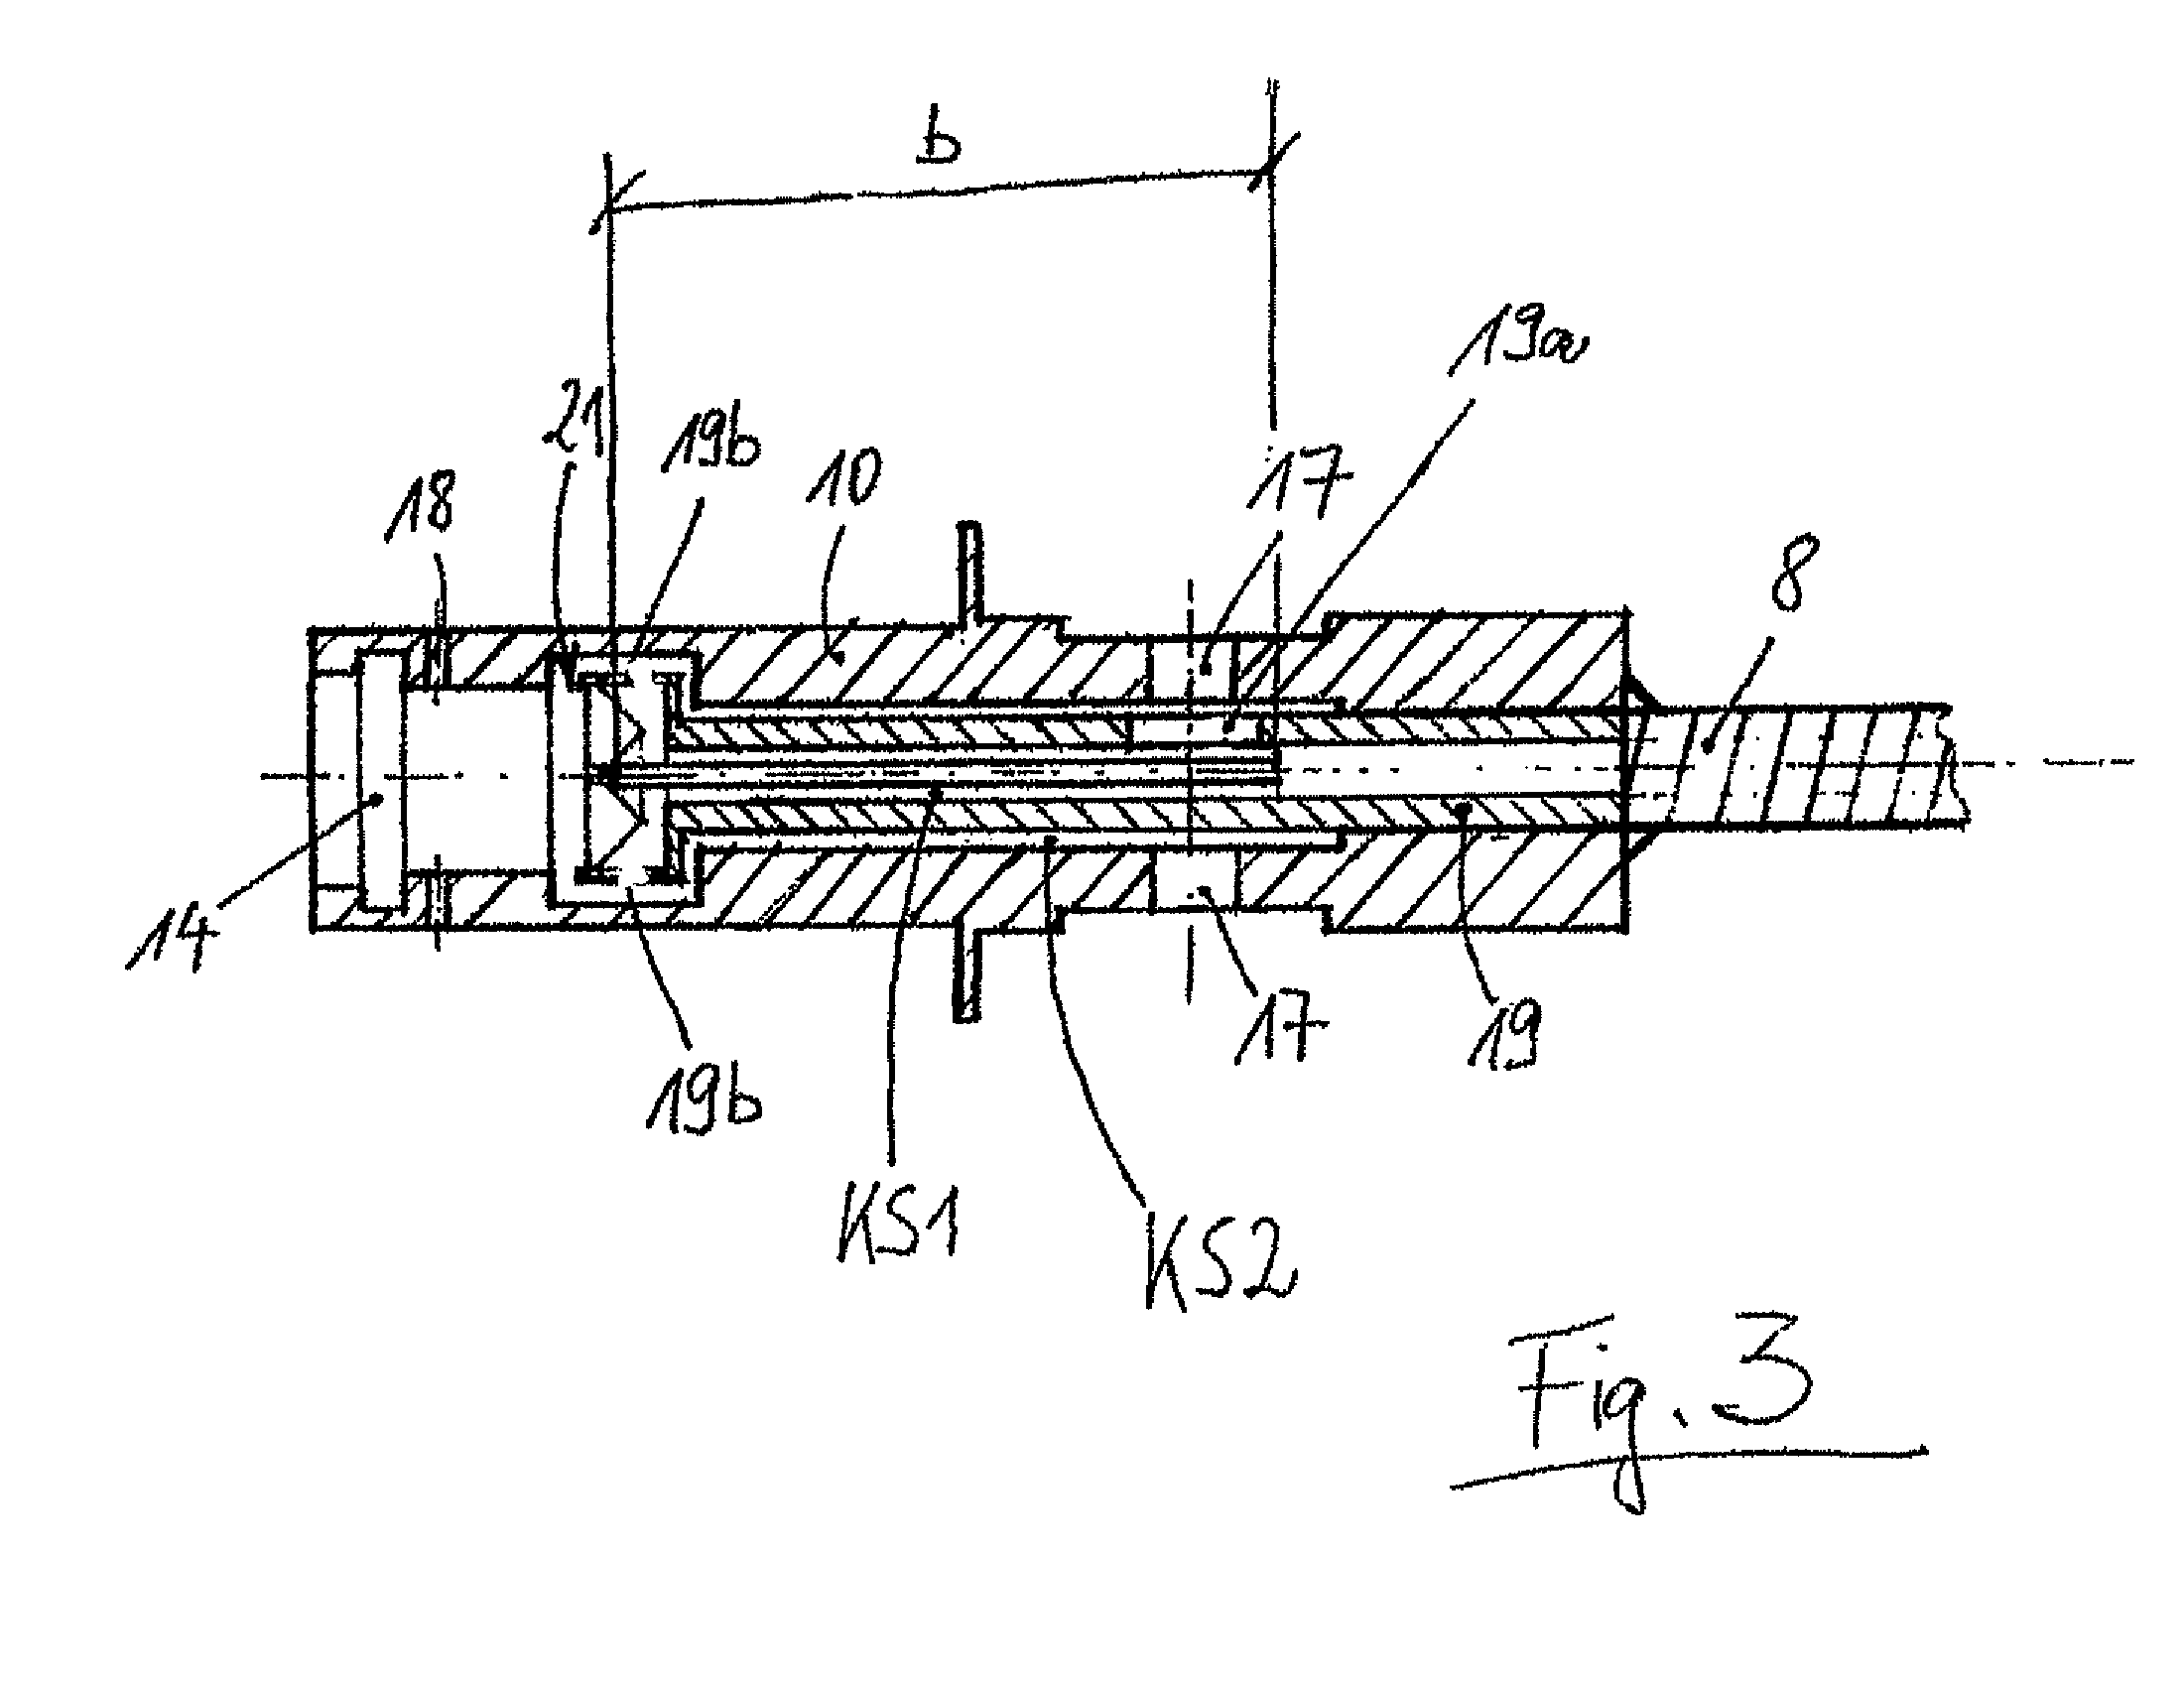 Air-cooled plug part for an optical waveguide